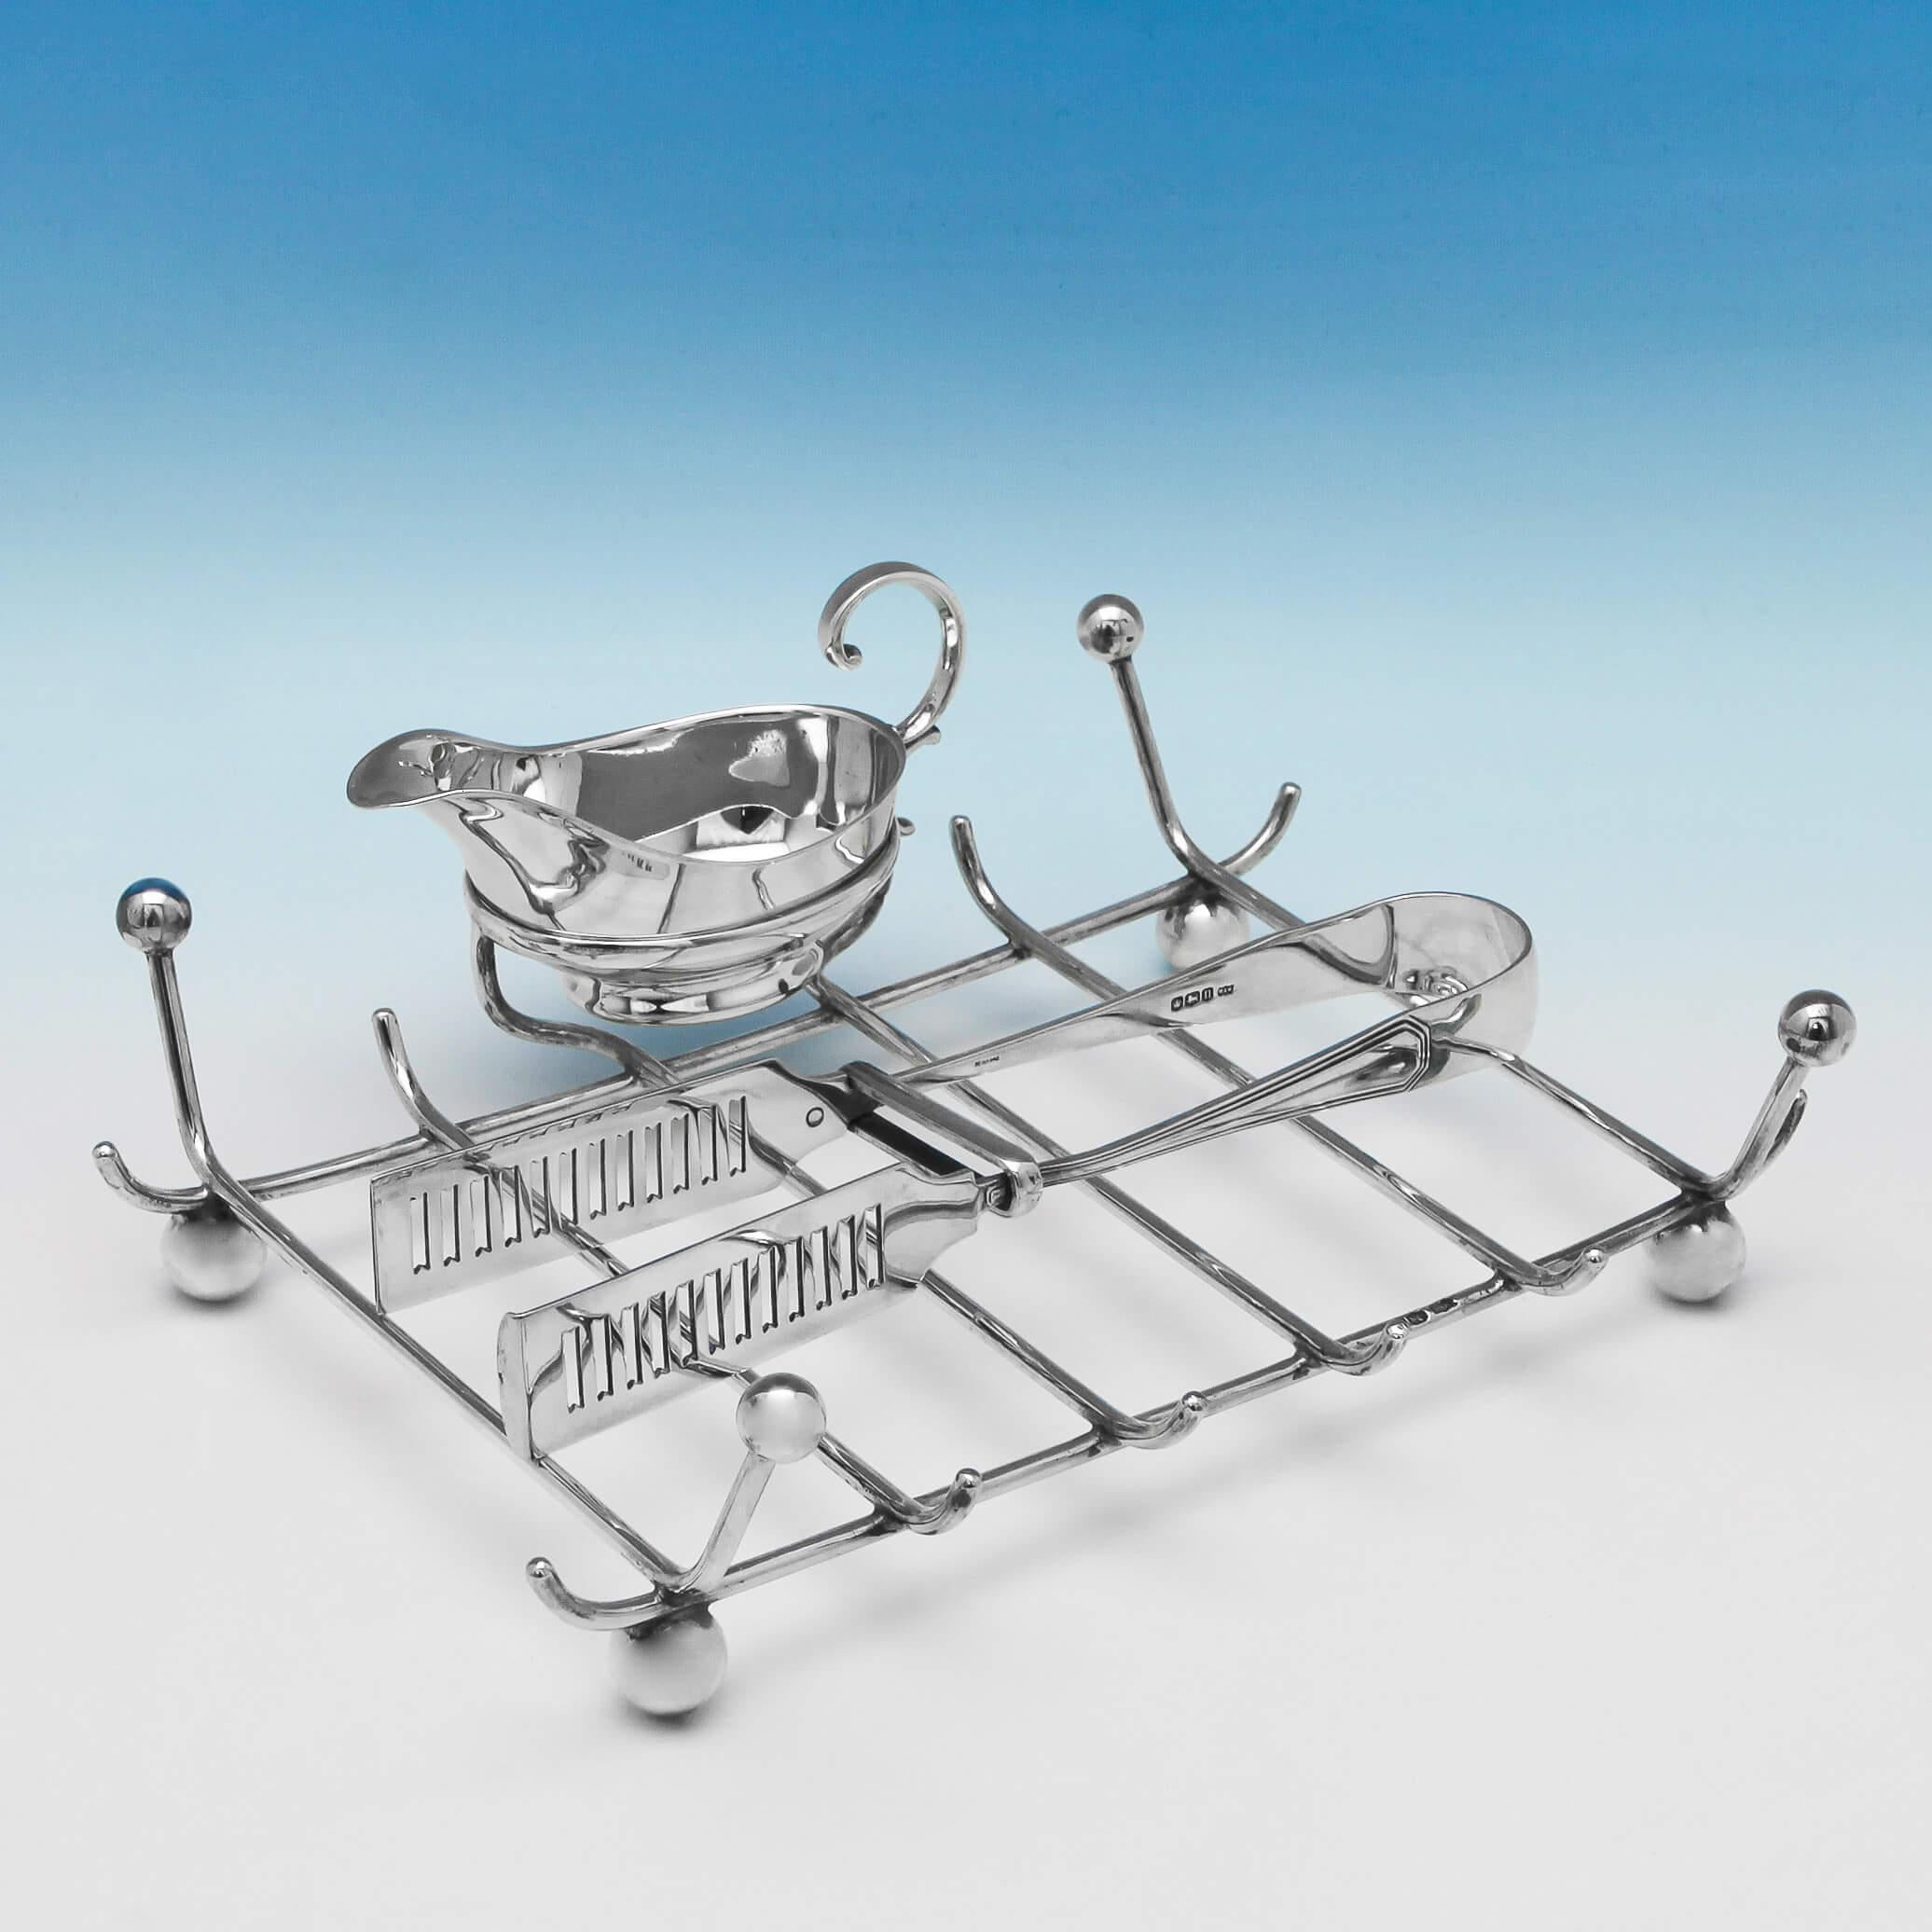 Hallmarked in Sheffield in 1930-1931 by Mappin & Webb, this handsome, George V, sterling silver asparagus dish, features serving tongs, a butter boat and a draining rack, all fitted on a shaped border tray, which stands on ball feet. The asparagus